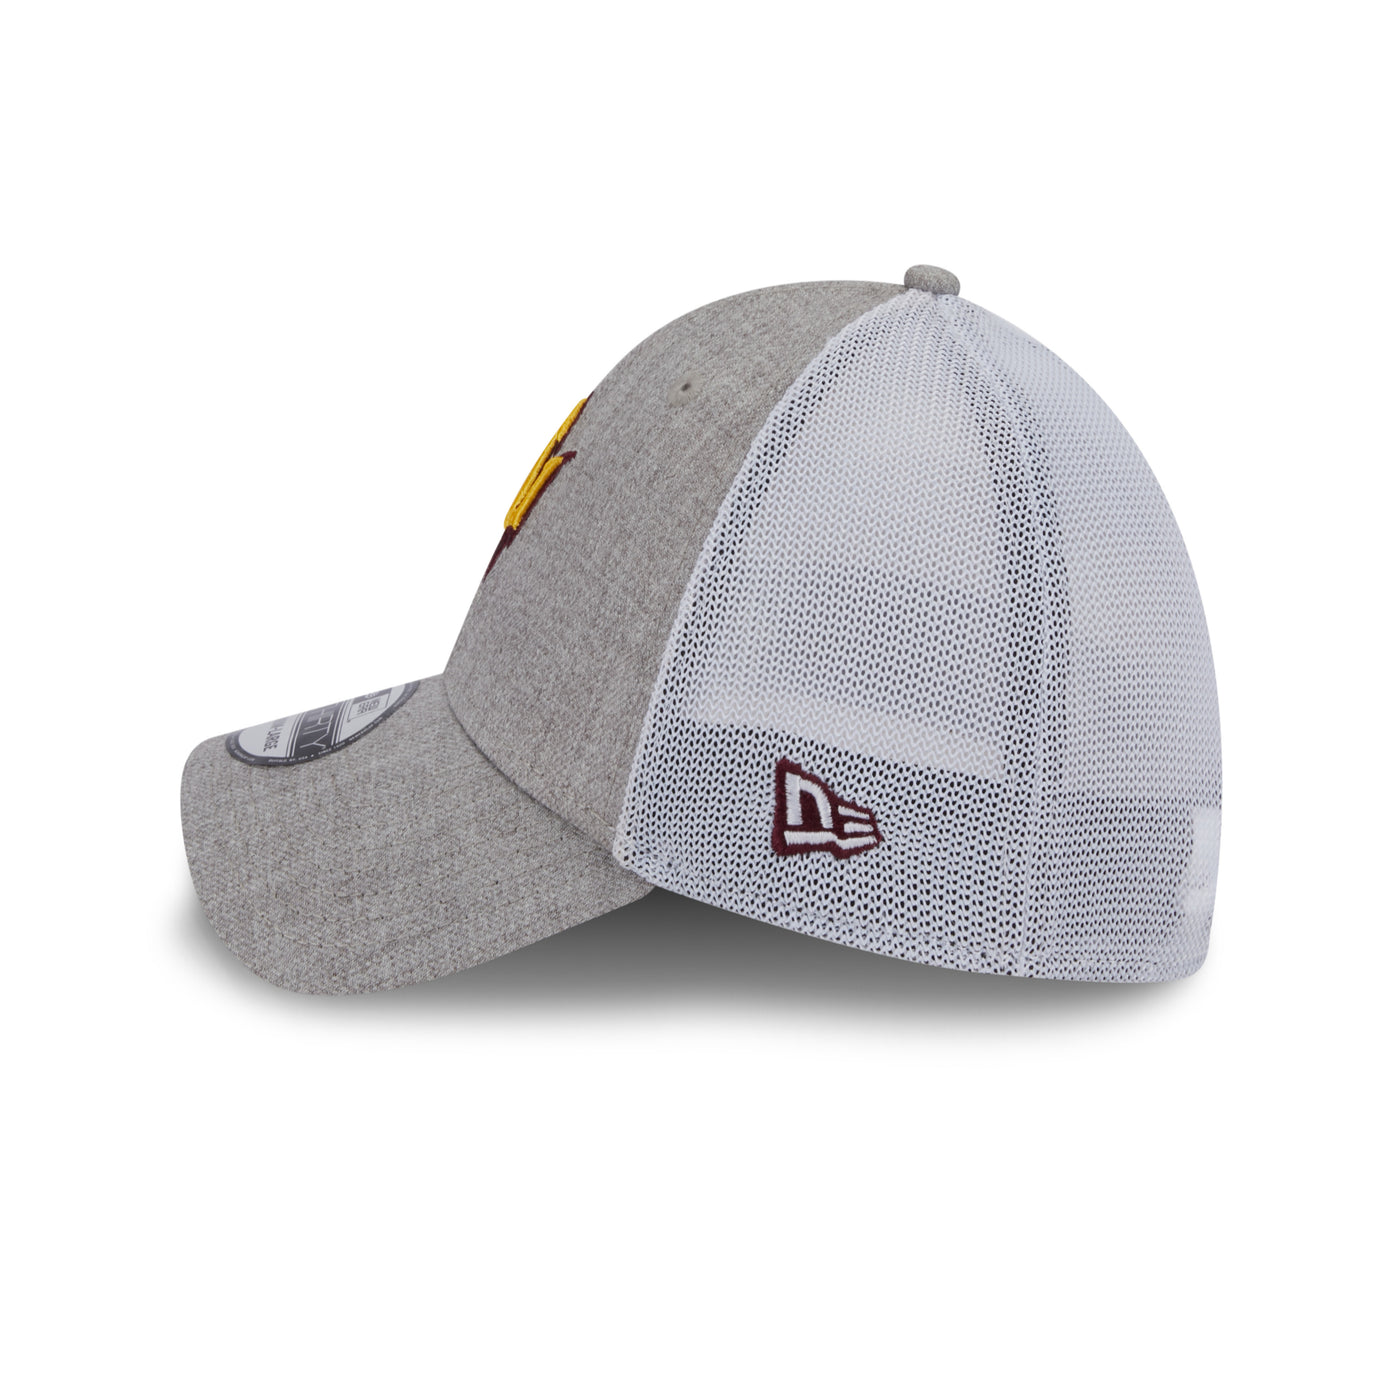 Side view of ASU New Era gray stretch fit hat with white mesh back and 2 gray front panels and a pitchfork in the front and center